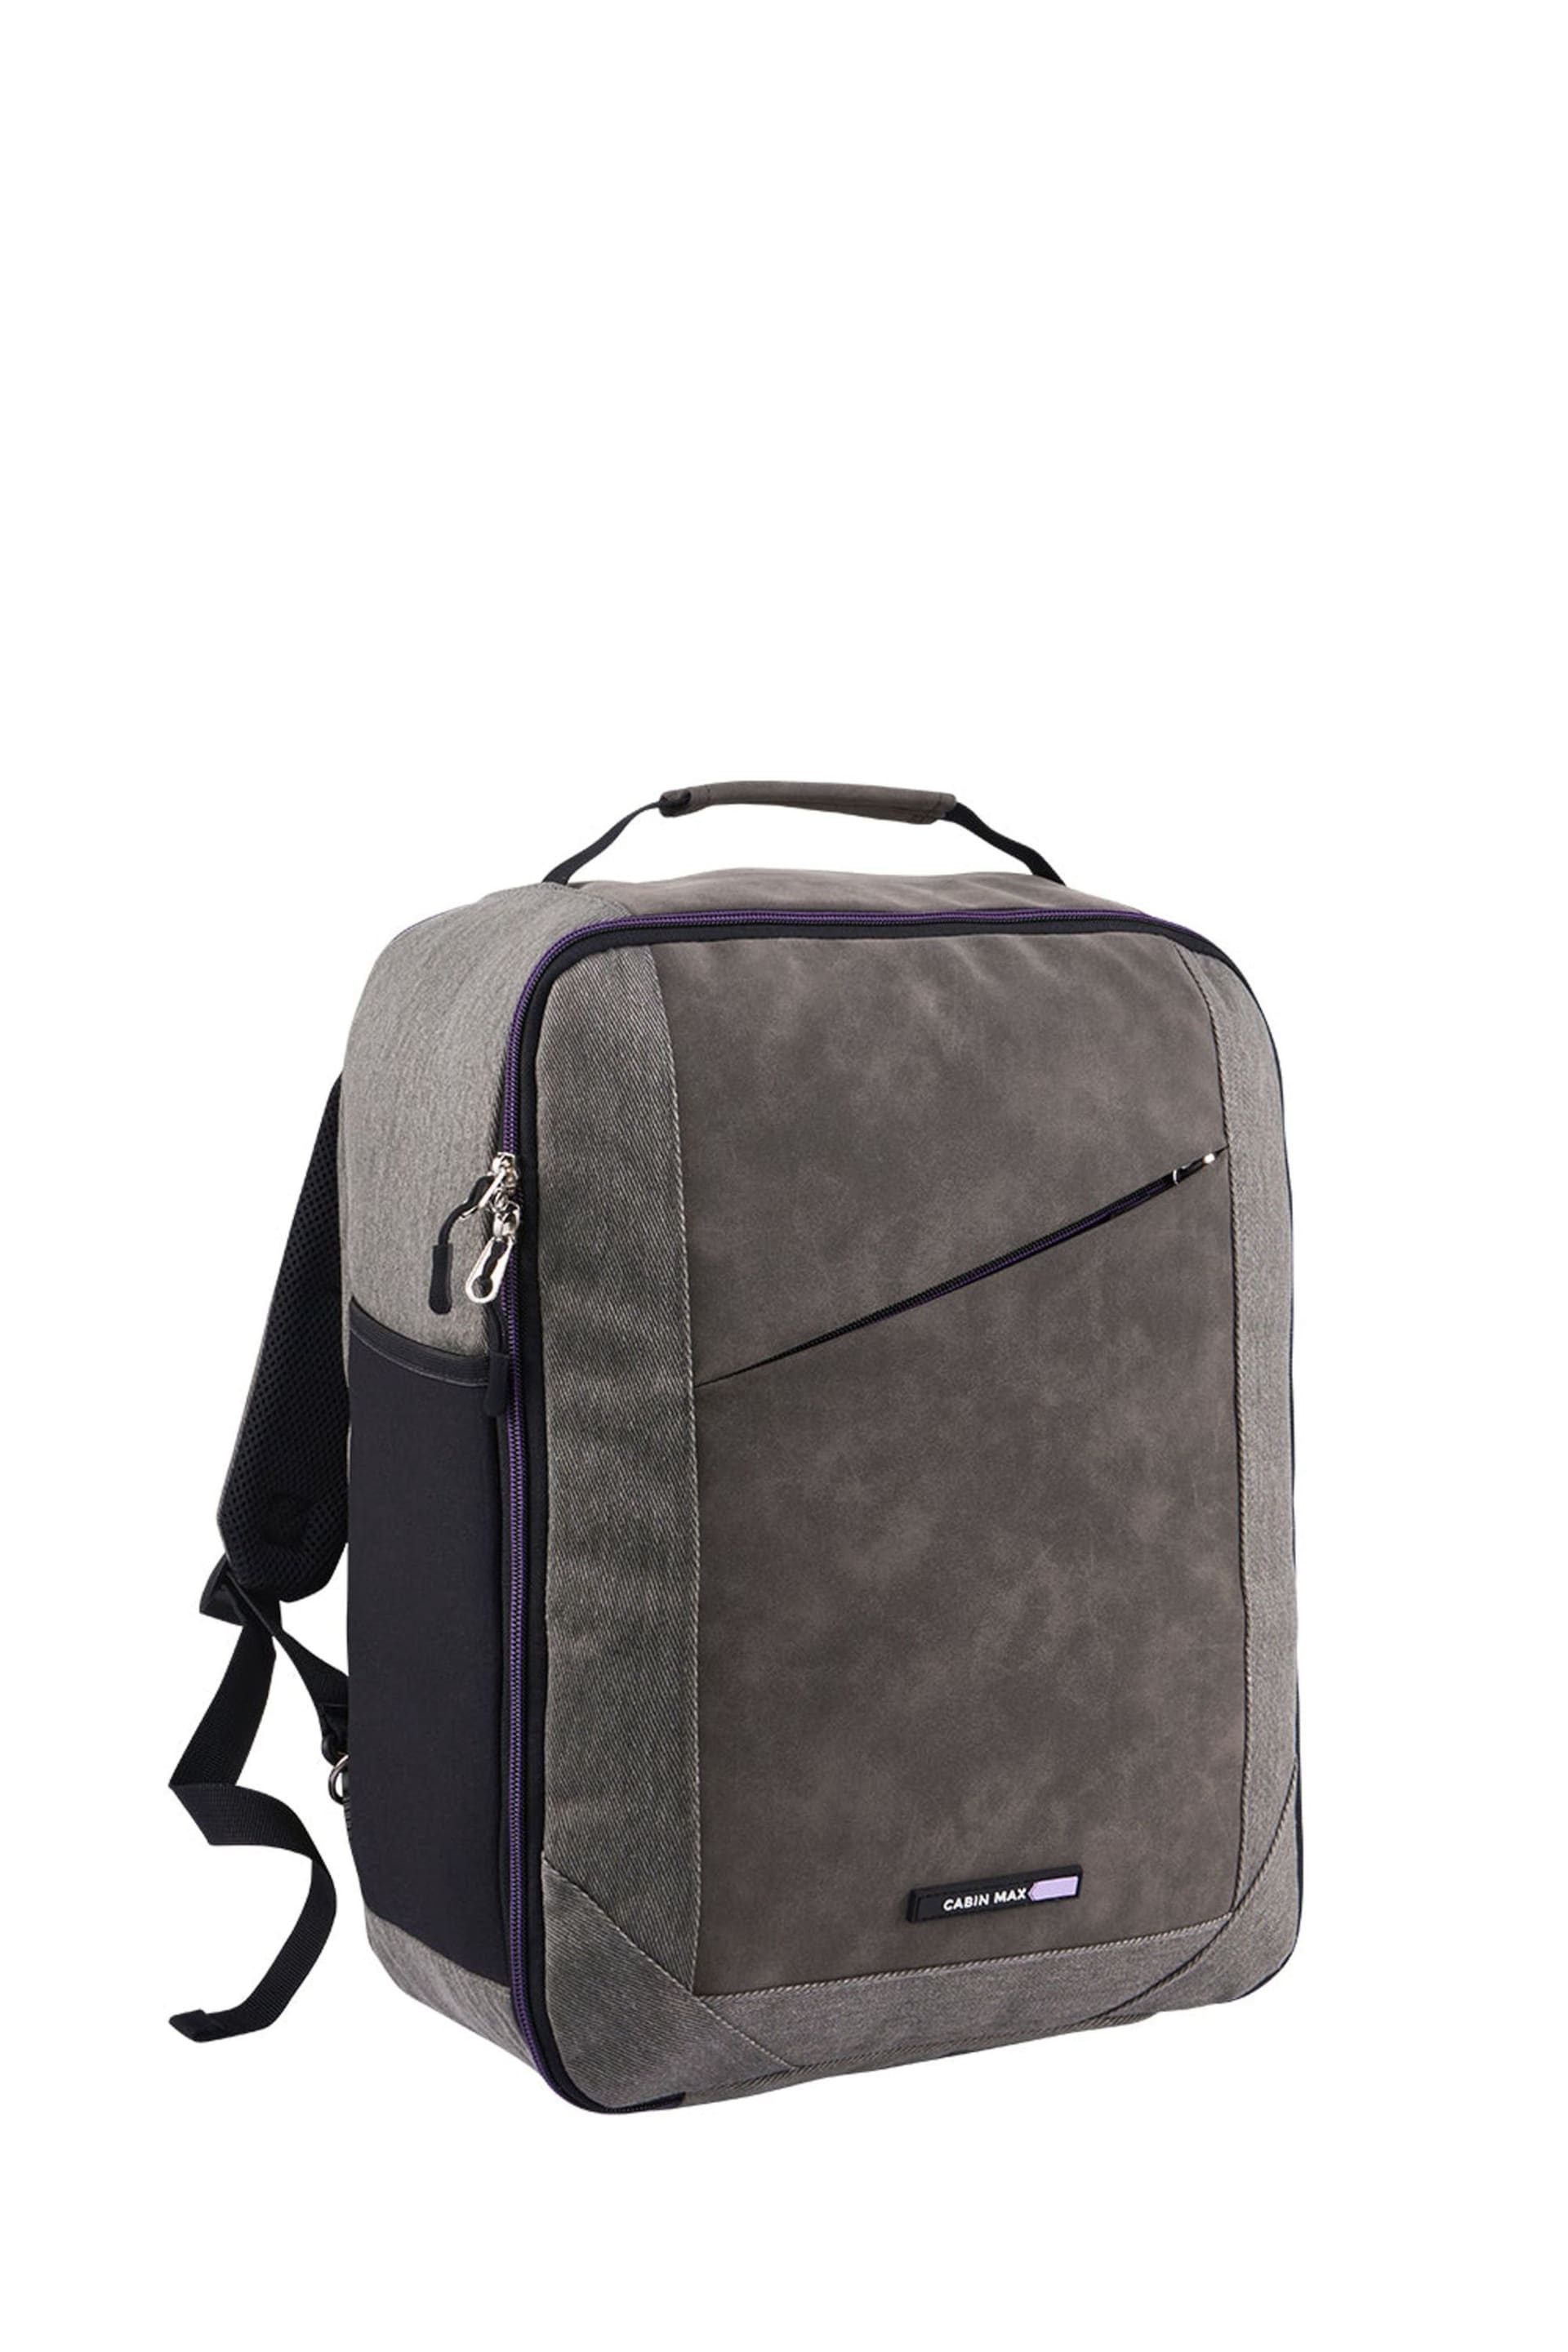 Cabin Max Underseat Backpack 30 Litre 45cm - Image 3 of 5